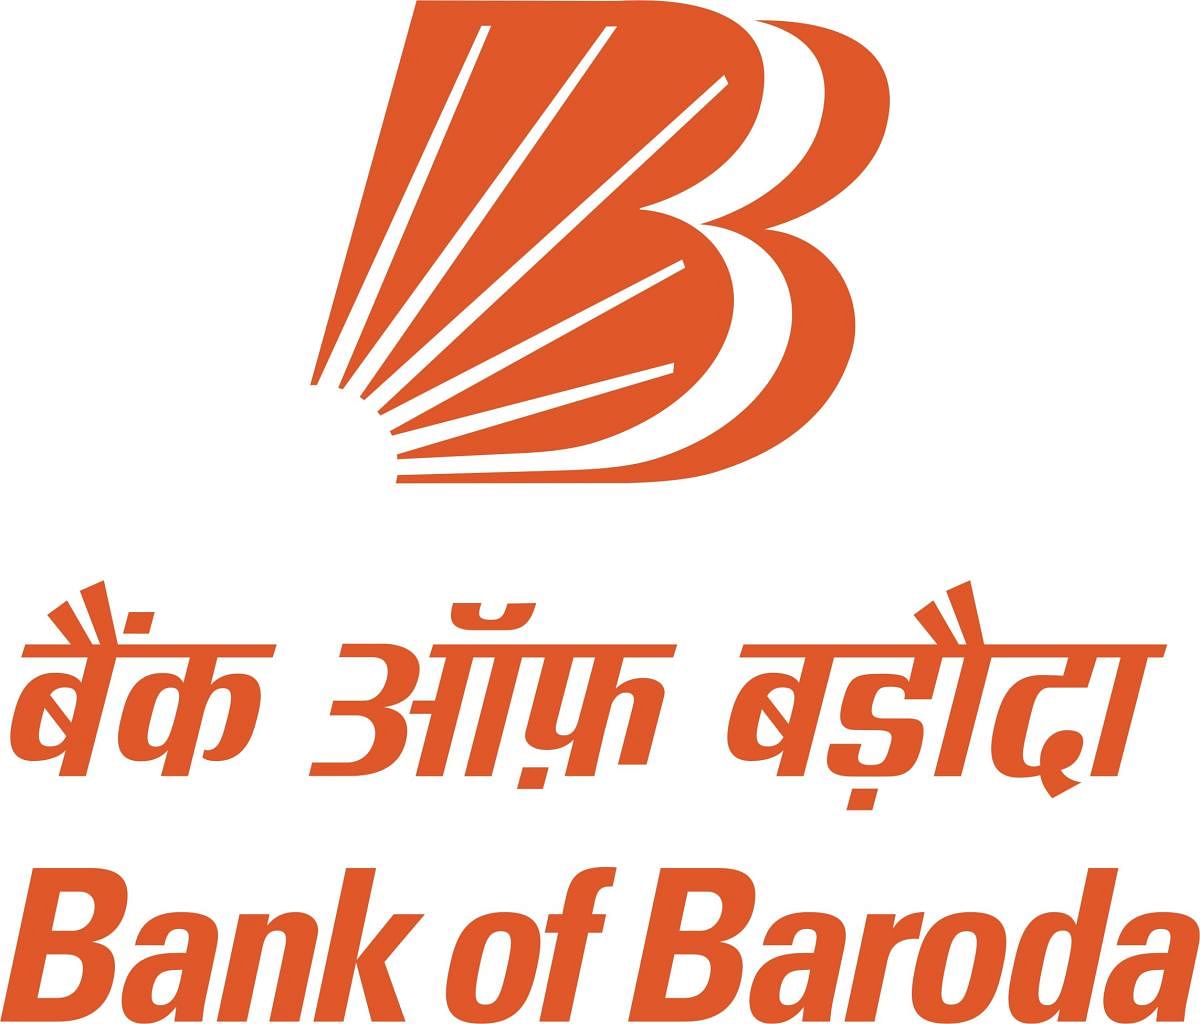 Baroda UP Bank to rationalise over 250 branches in semi-urban, rural areas  | Company News - Business Standard